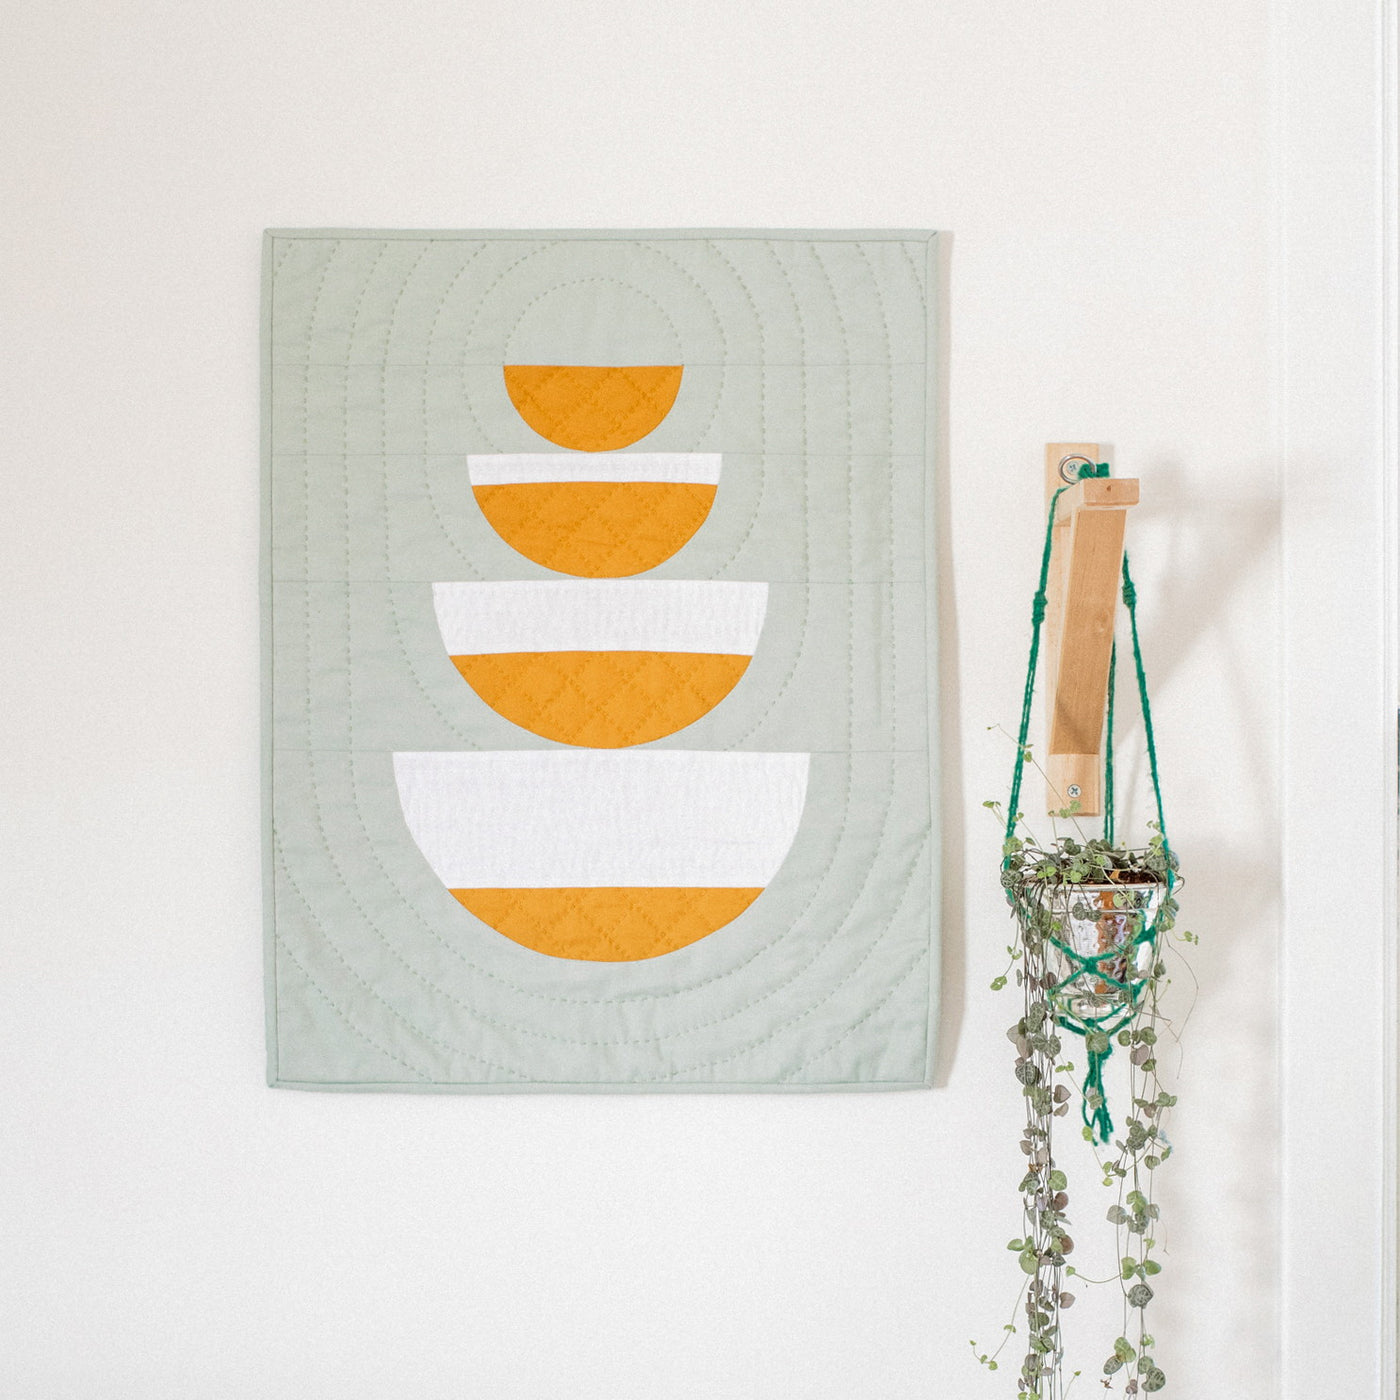 Feast: A Mini Quilt Pattern by Brooke Shankland